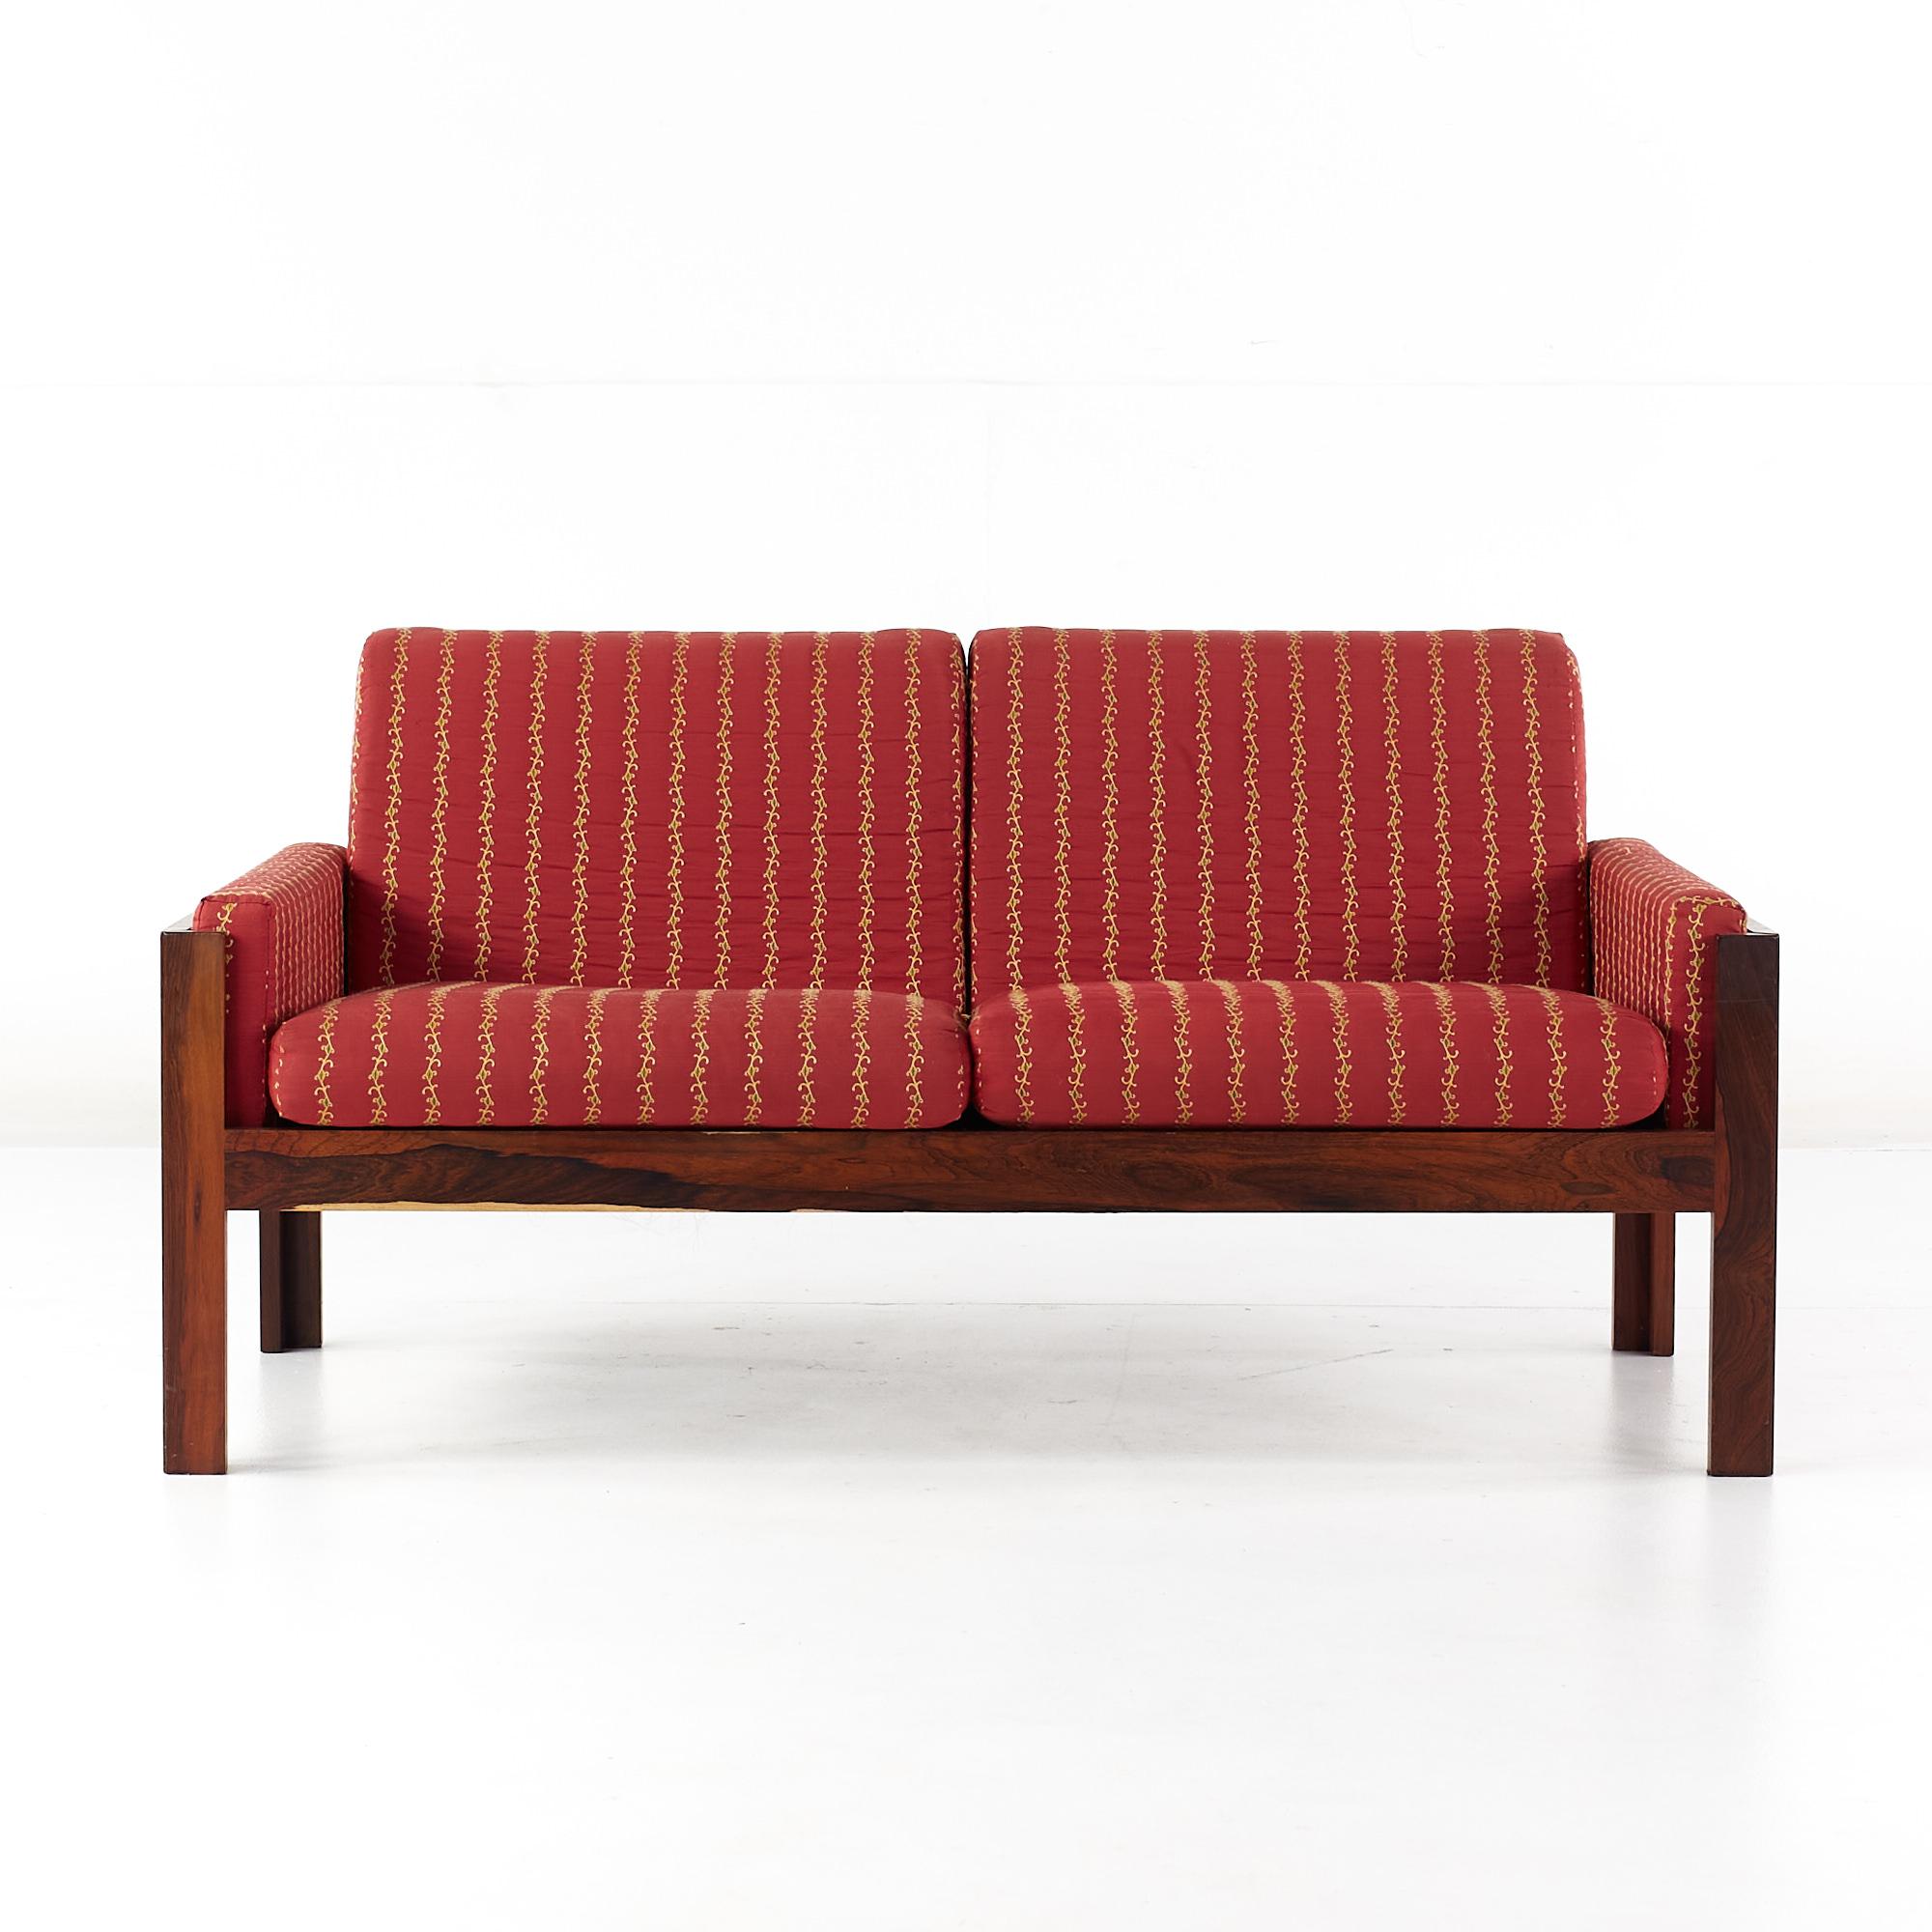 Arne Norell Style mid century Danish rosewood settee loveseat sofa.

This settee measures: 51.25 wide x 27 deep x 26 inches high.

All pieces of furniture can be had in what we call restored vintage condition. That means the piece is restored